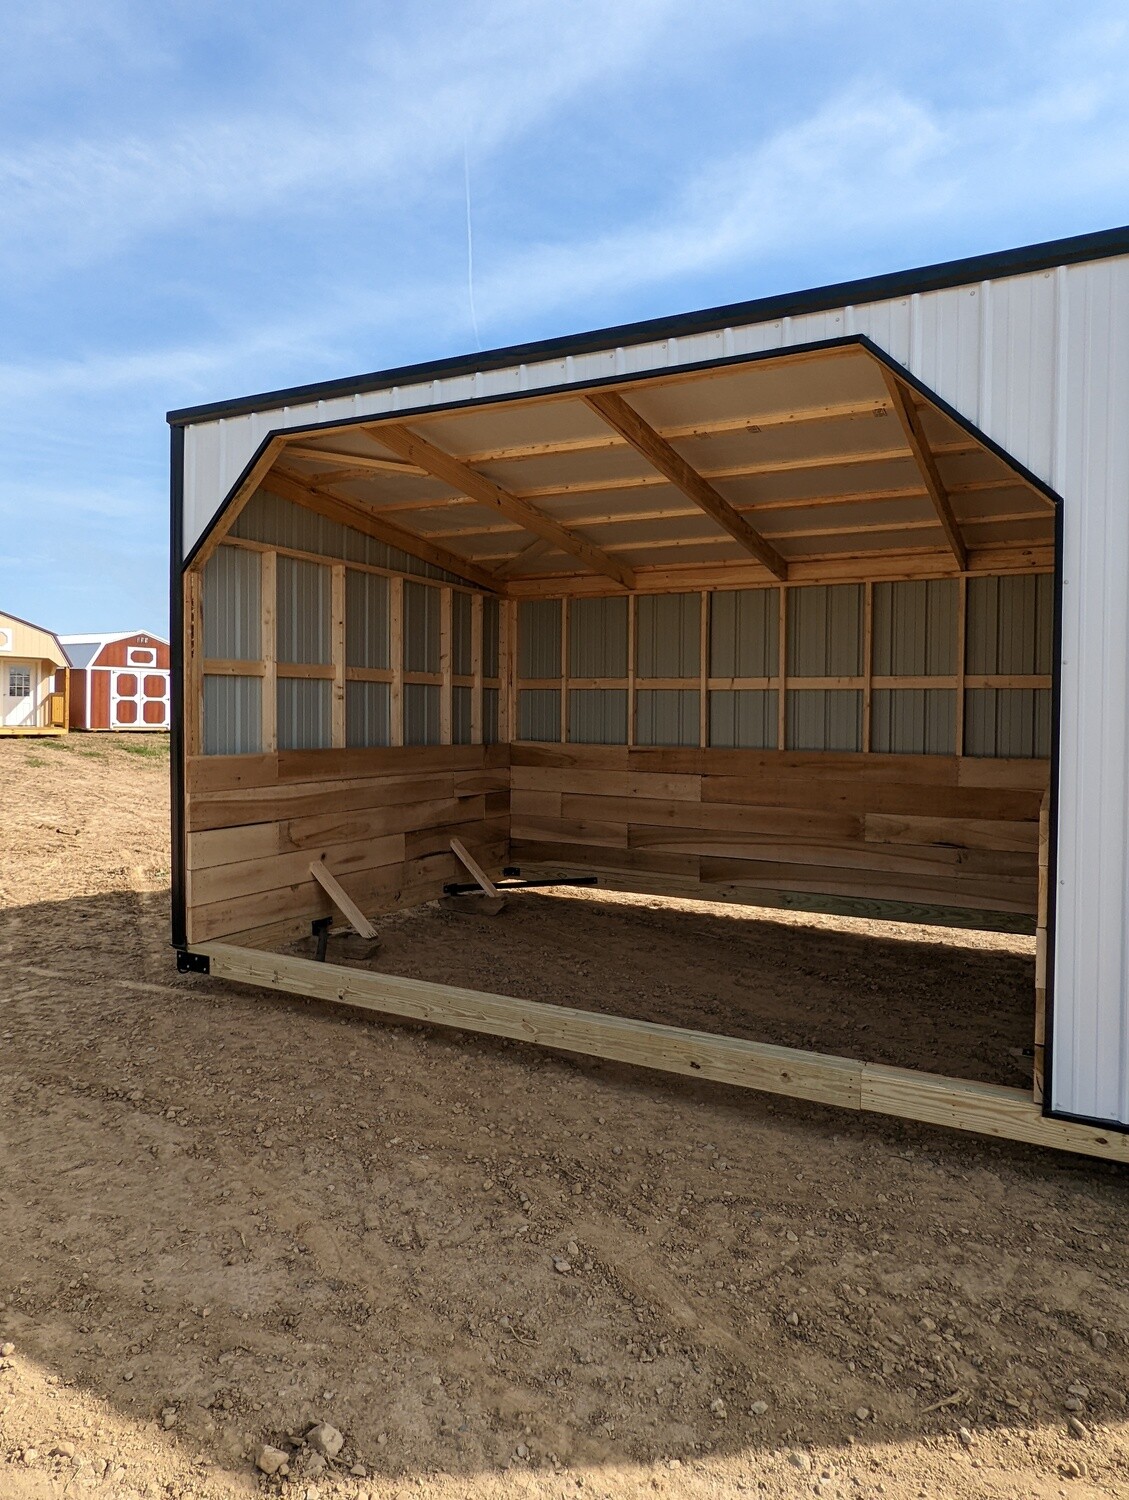 12' x 16' Horse Run-in Structures